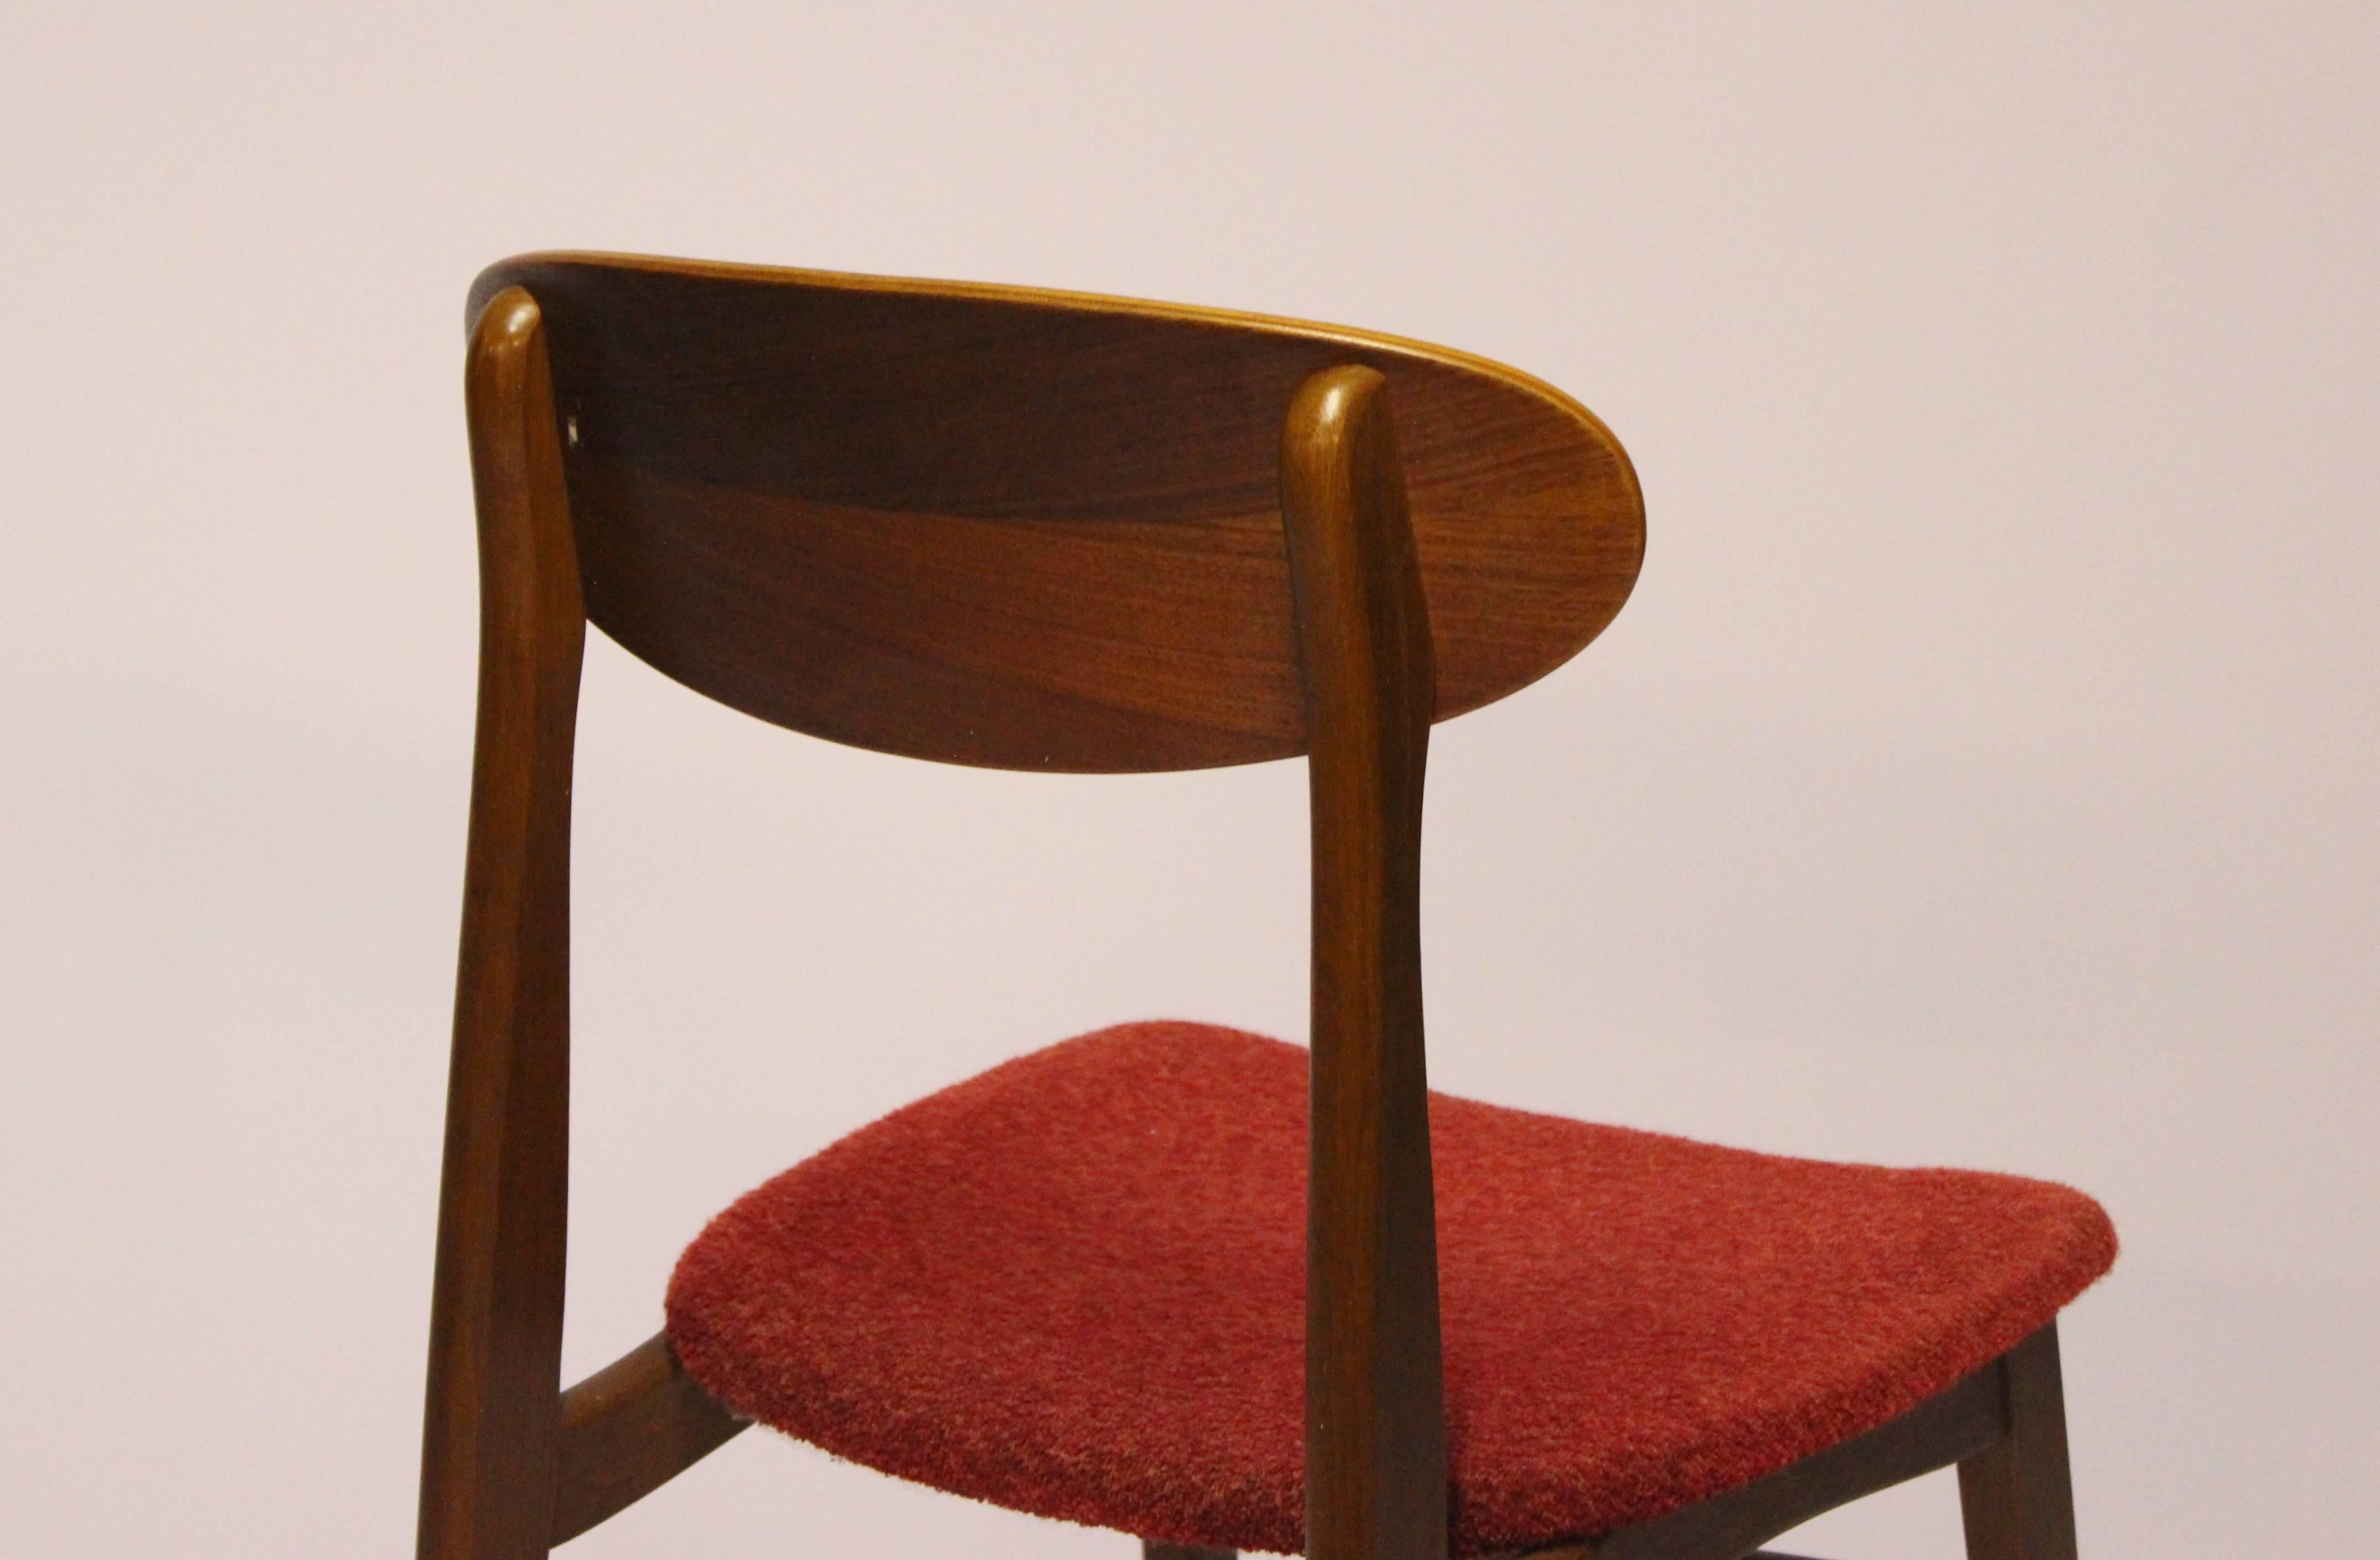 Fabric Set of Four Dining Room Chairs in Teak, of Danish Design, 1960s